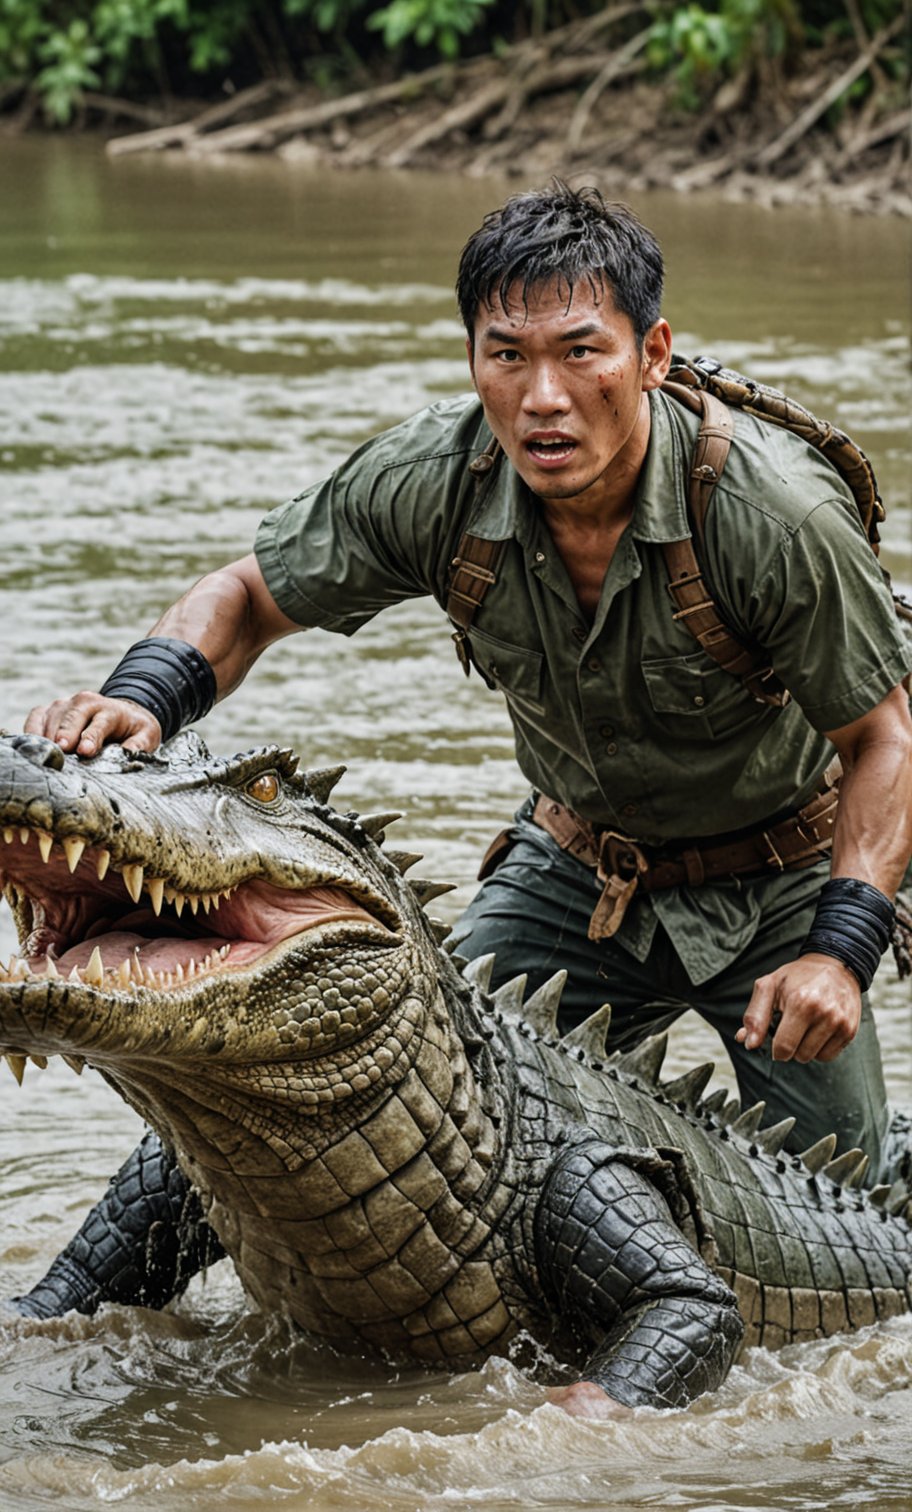 Asian man, warrior clothes, attacked by a big crocodile in the river, fighting, the picture looks real and clear, facial details, real life,